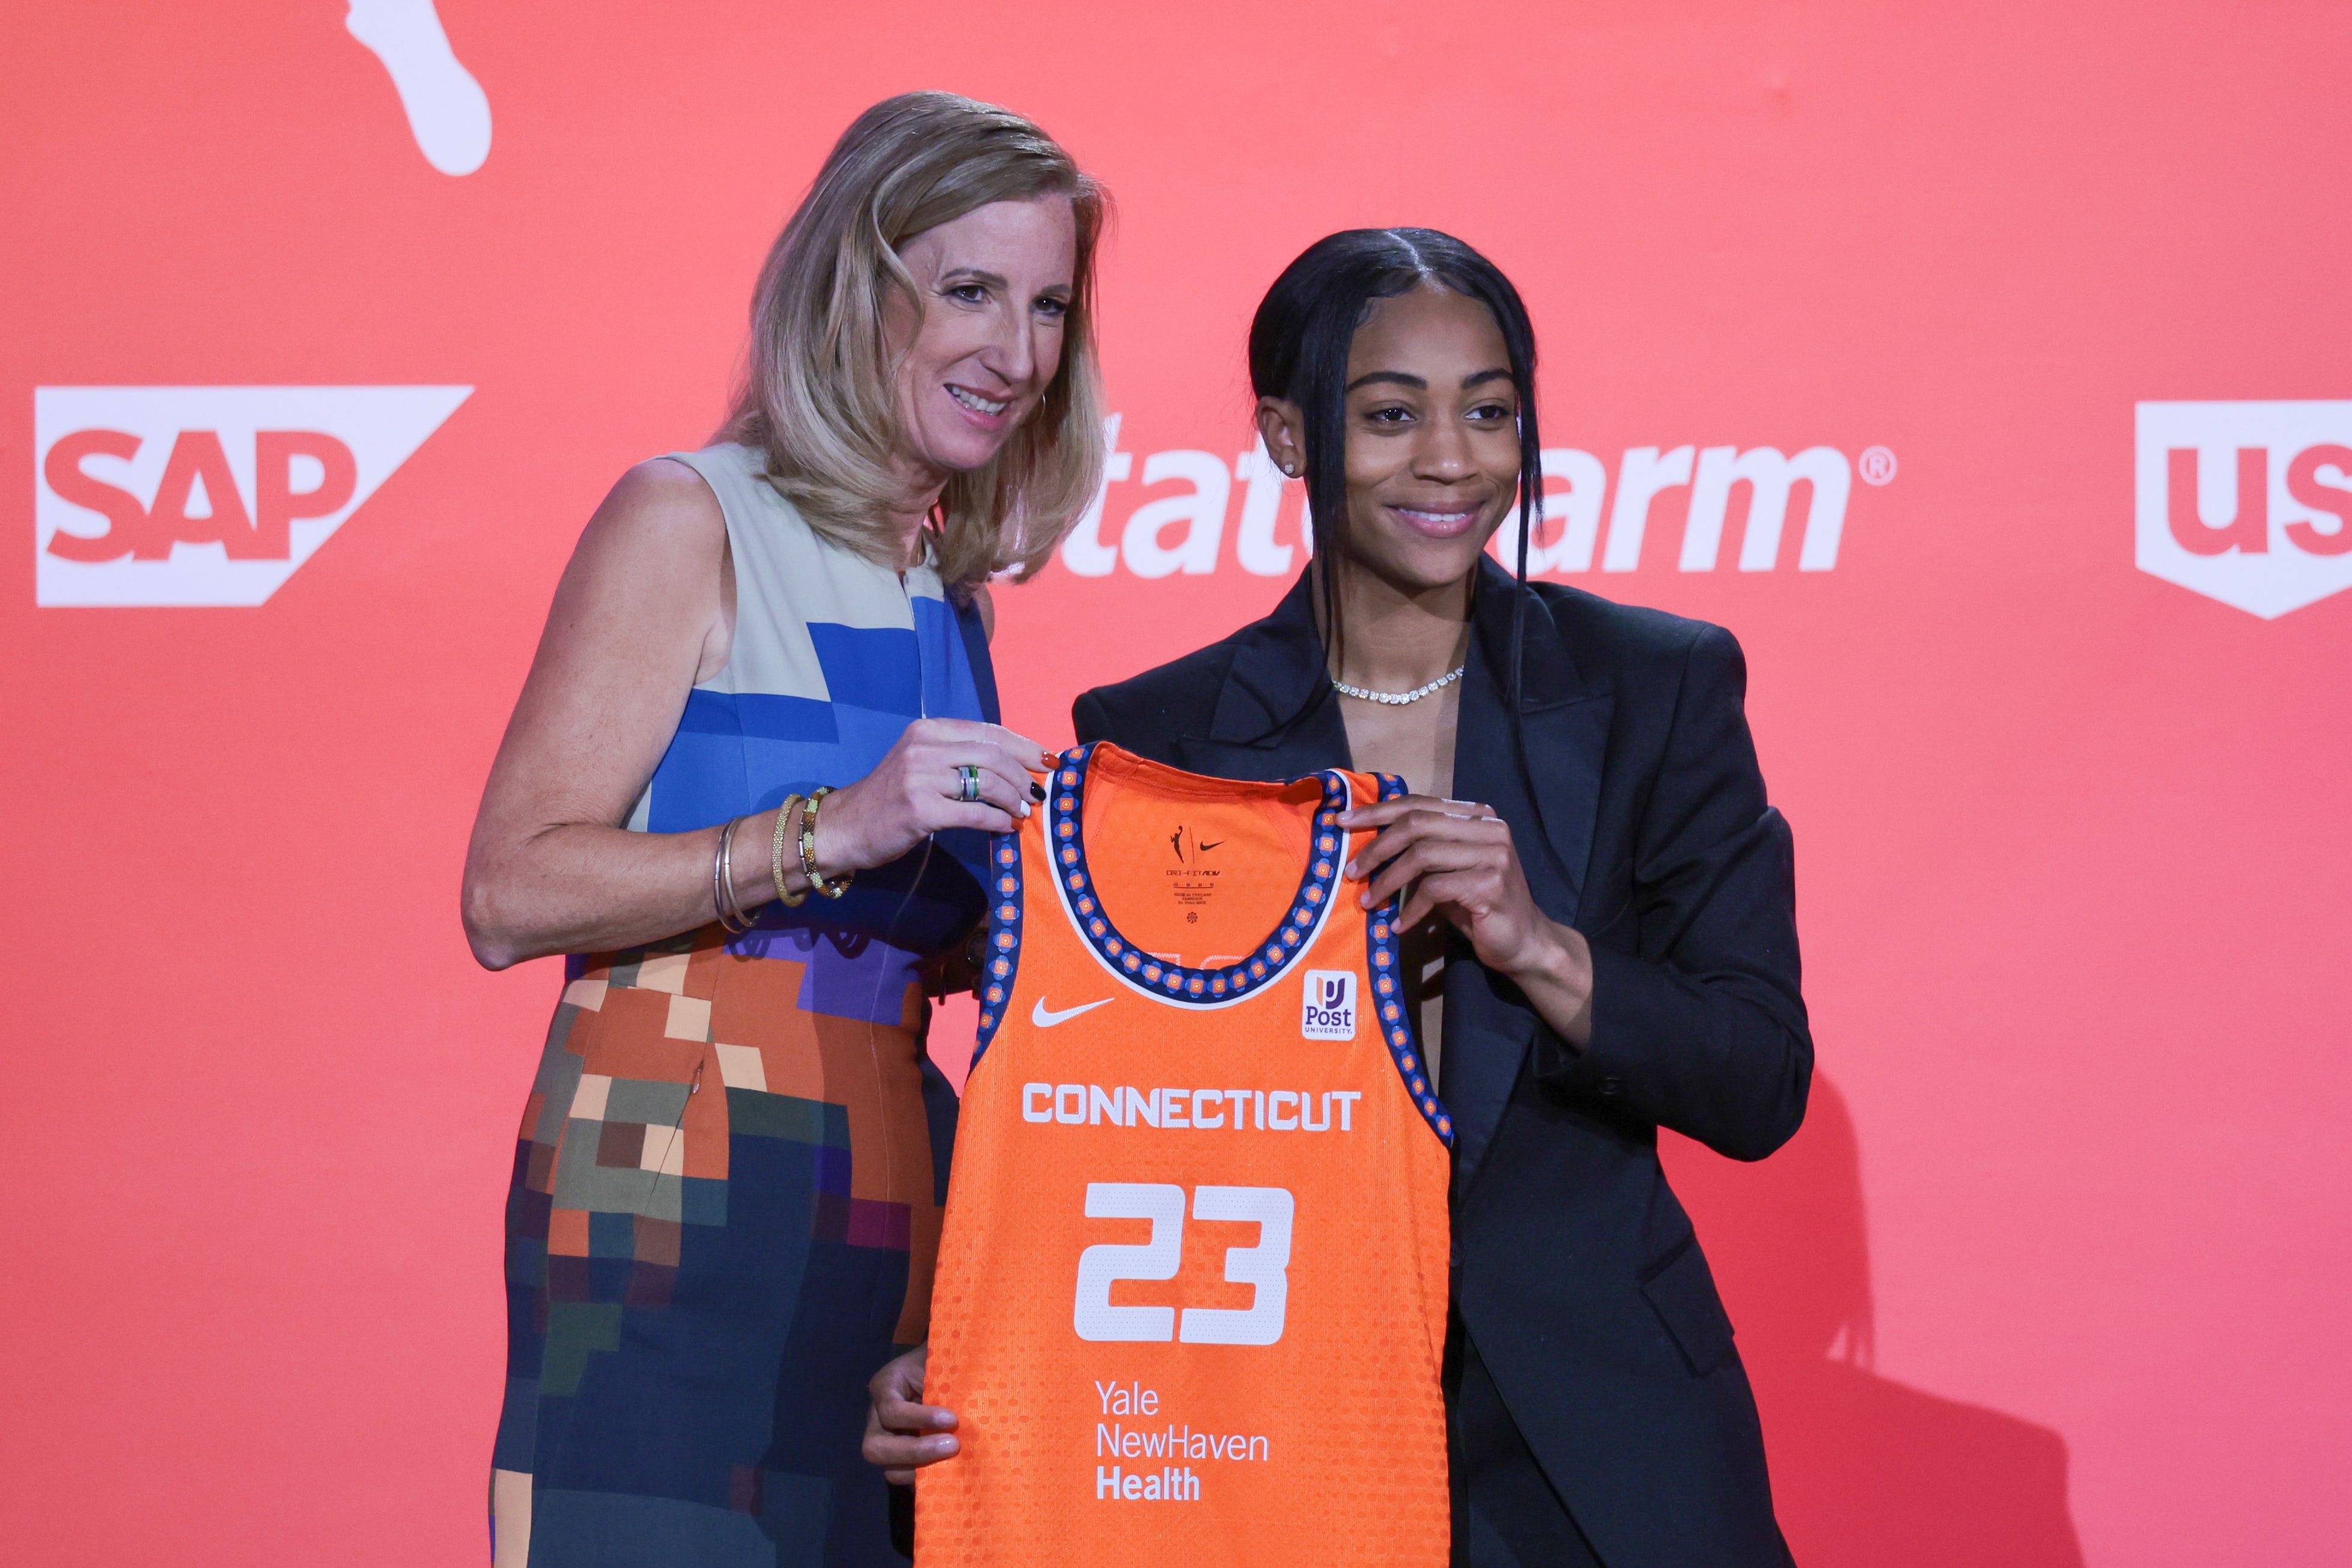 91c115db-9b90-4647-aaaf-5f3e1a096e8d-draft-sun Former LSU guard Alexis Morris apologizes to WNBA veterans after calling for them to retire